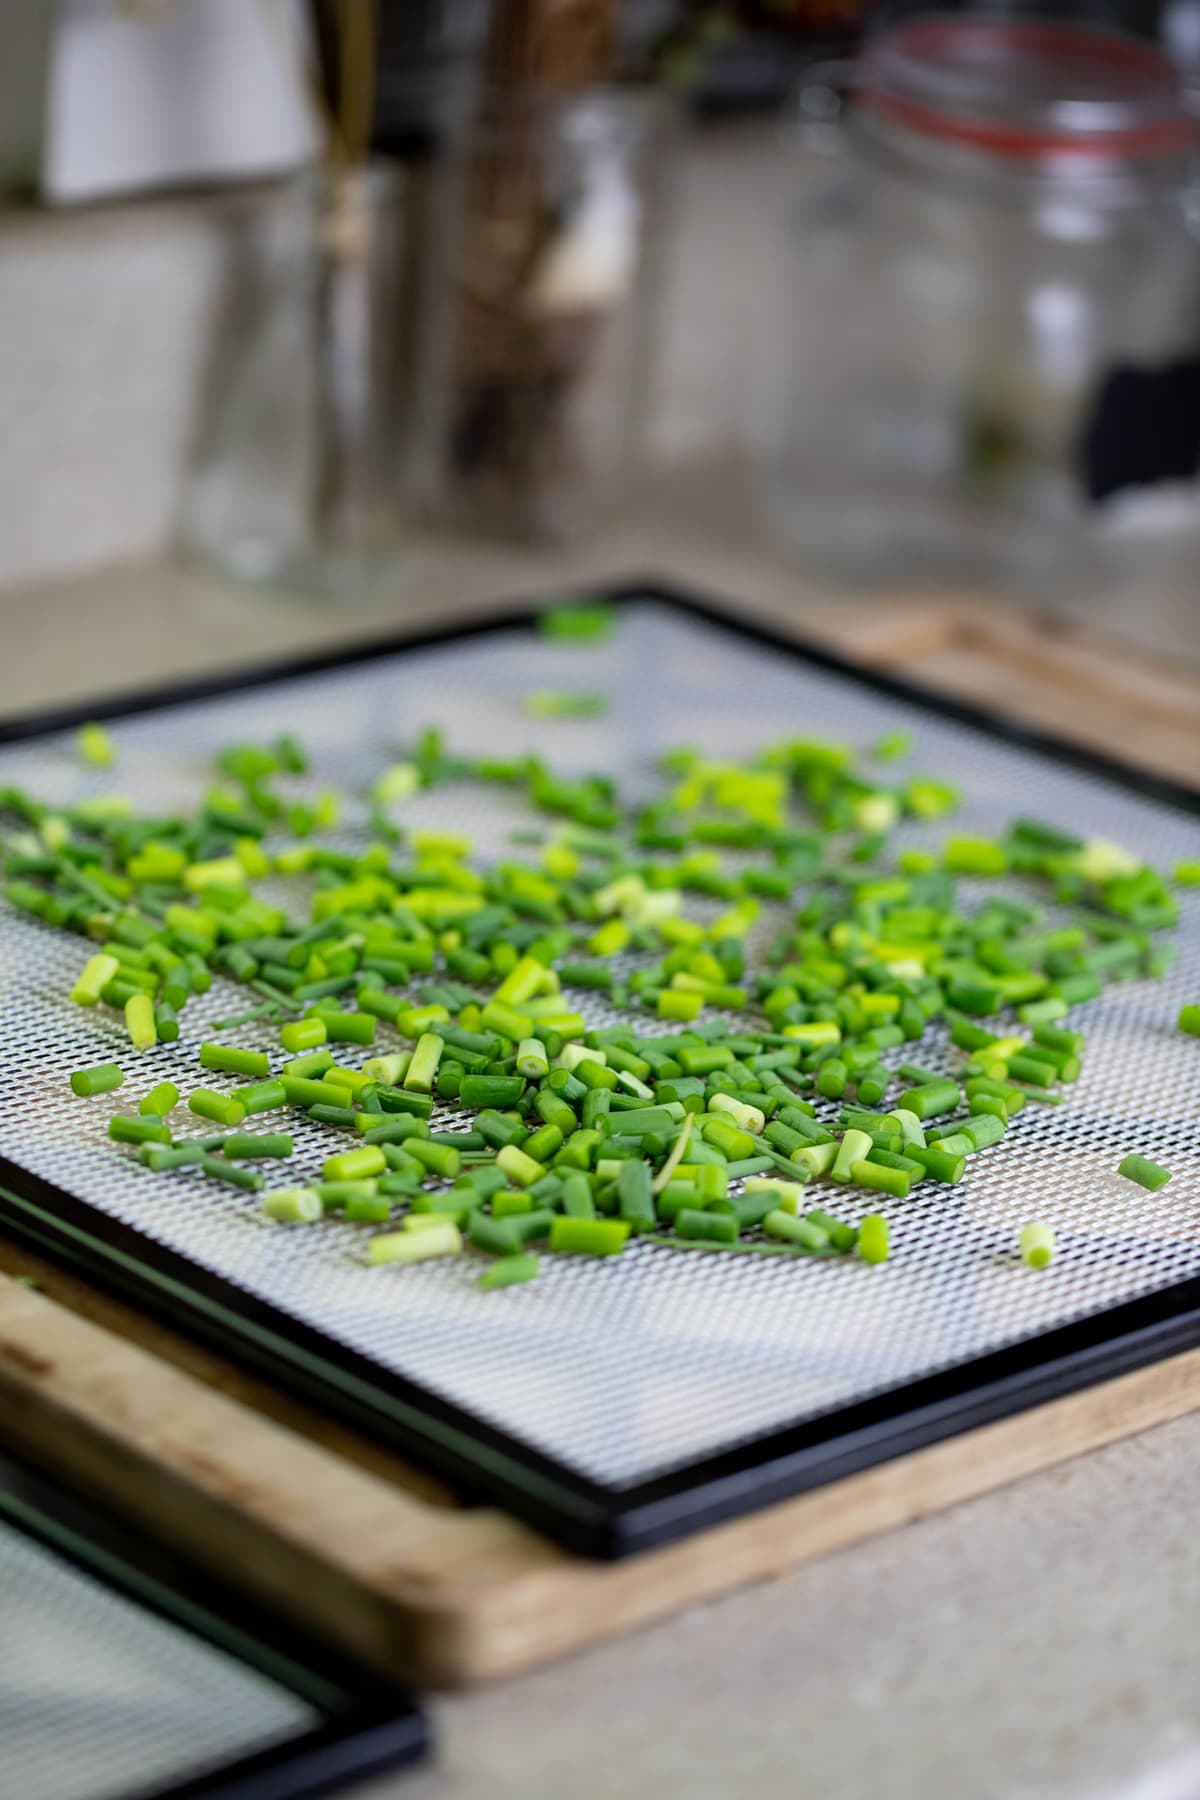 placing the scapes on the trays of the dehydrator